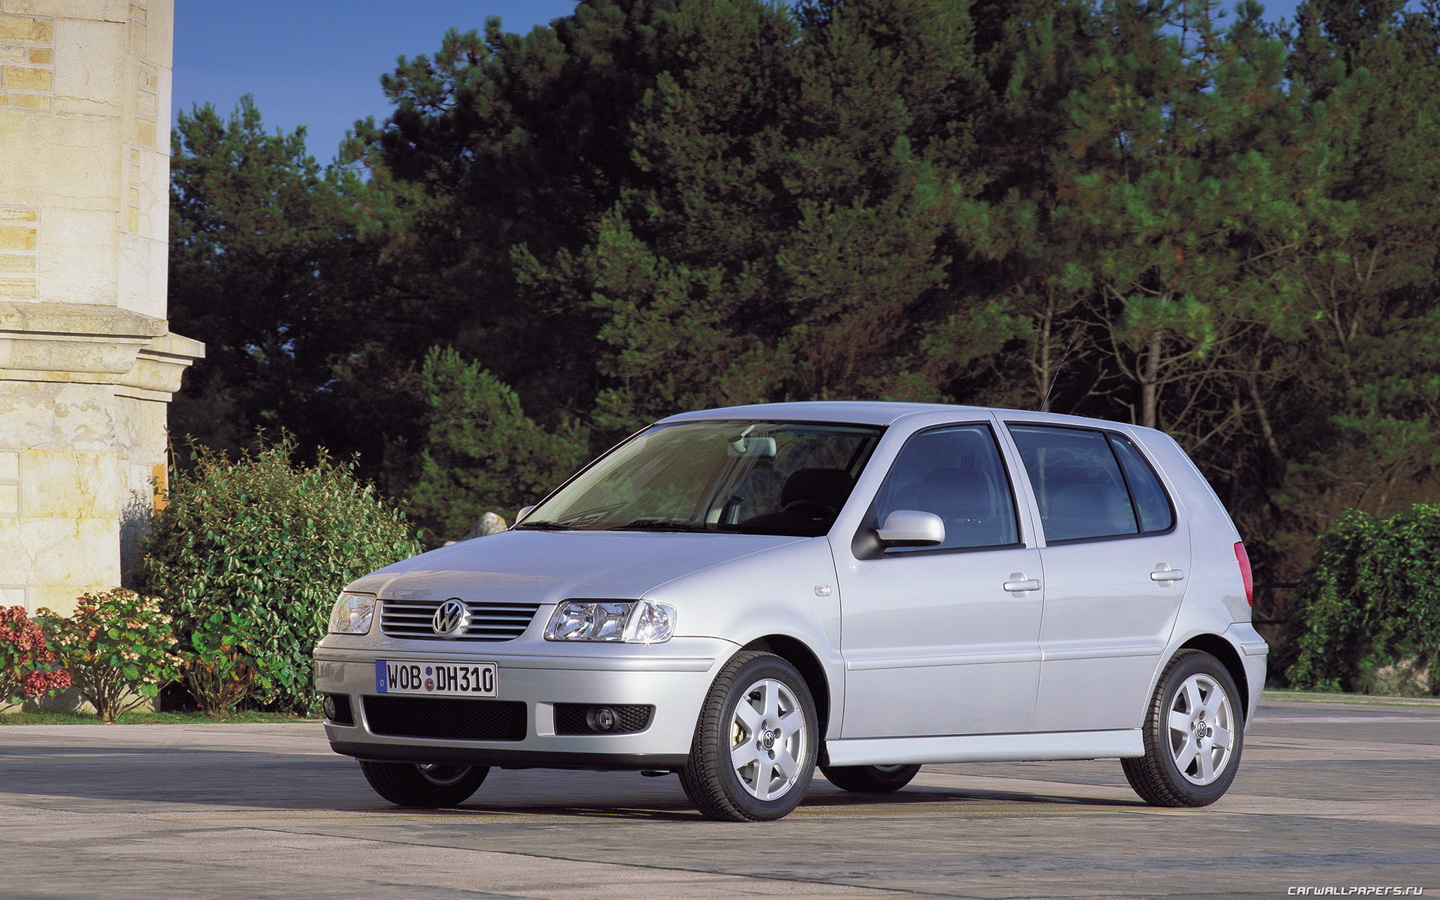 Volkswagen Polo 1999 Review, Amazing Pictures and Images